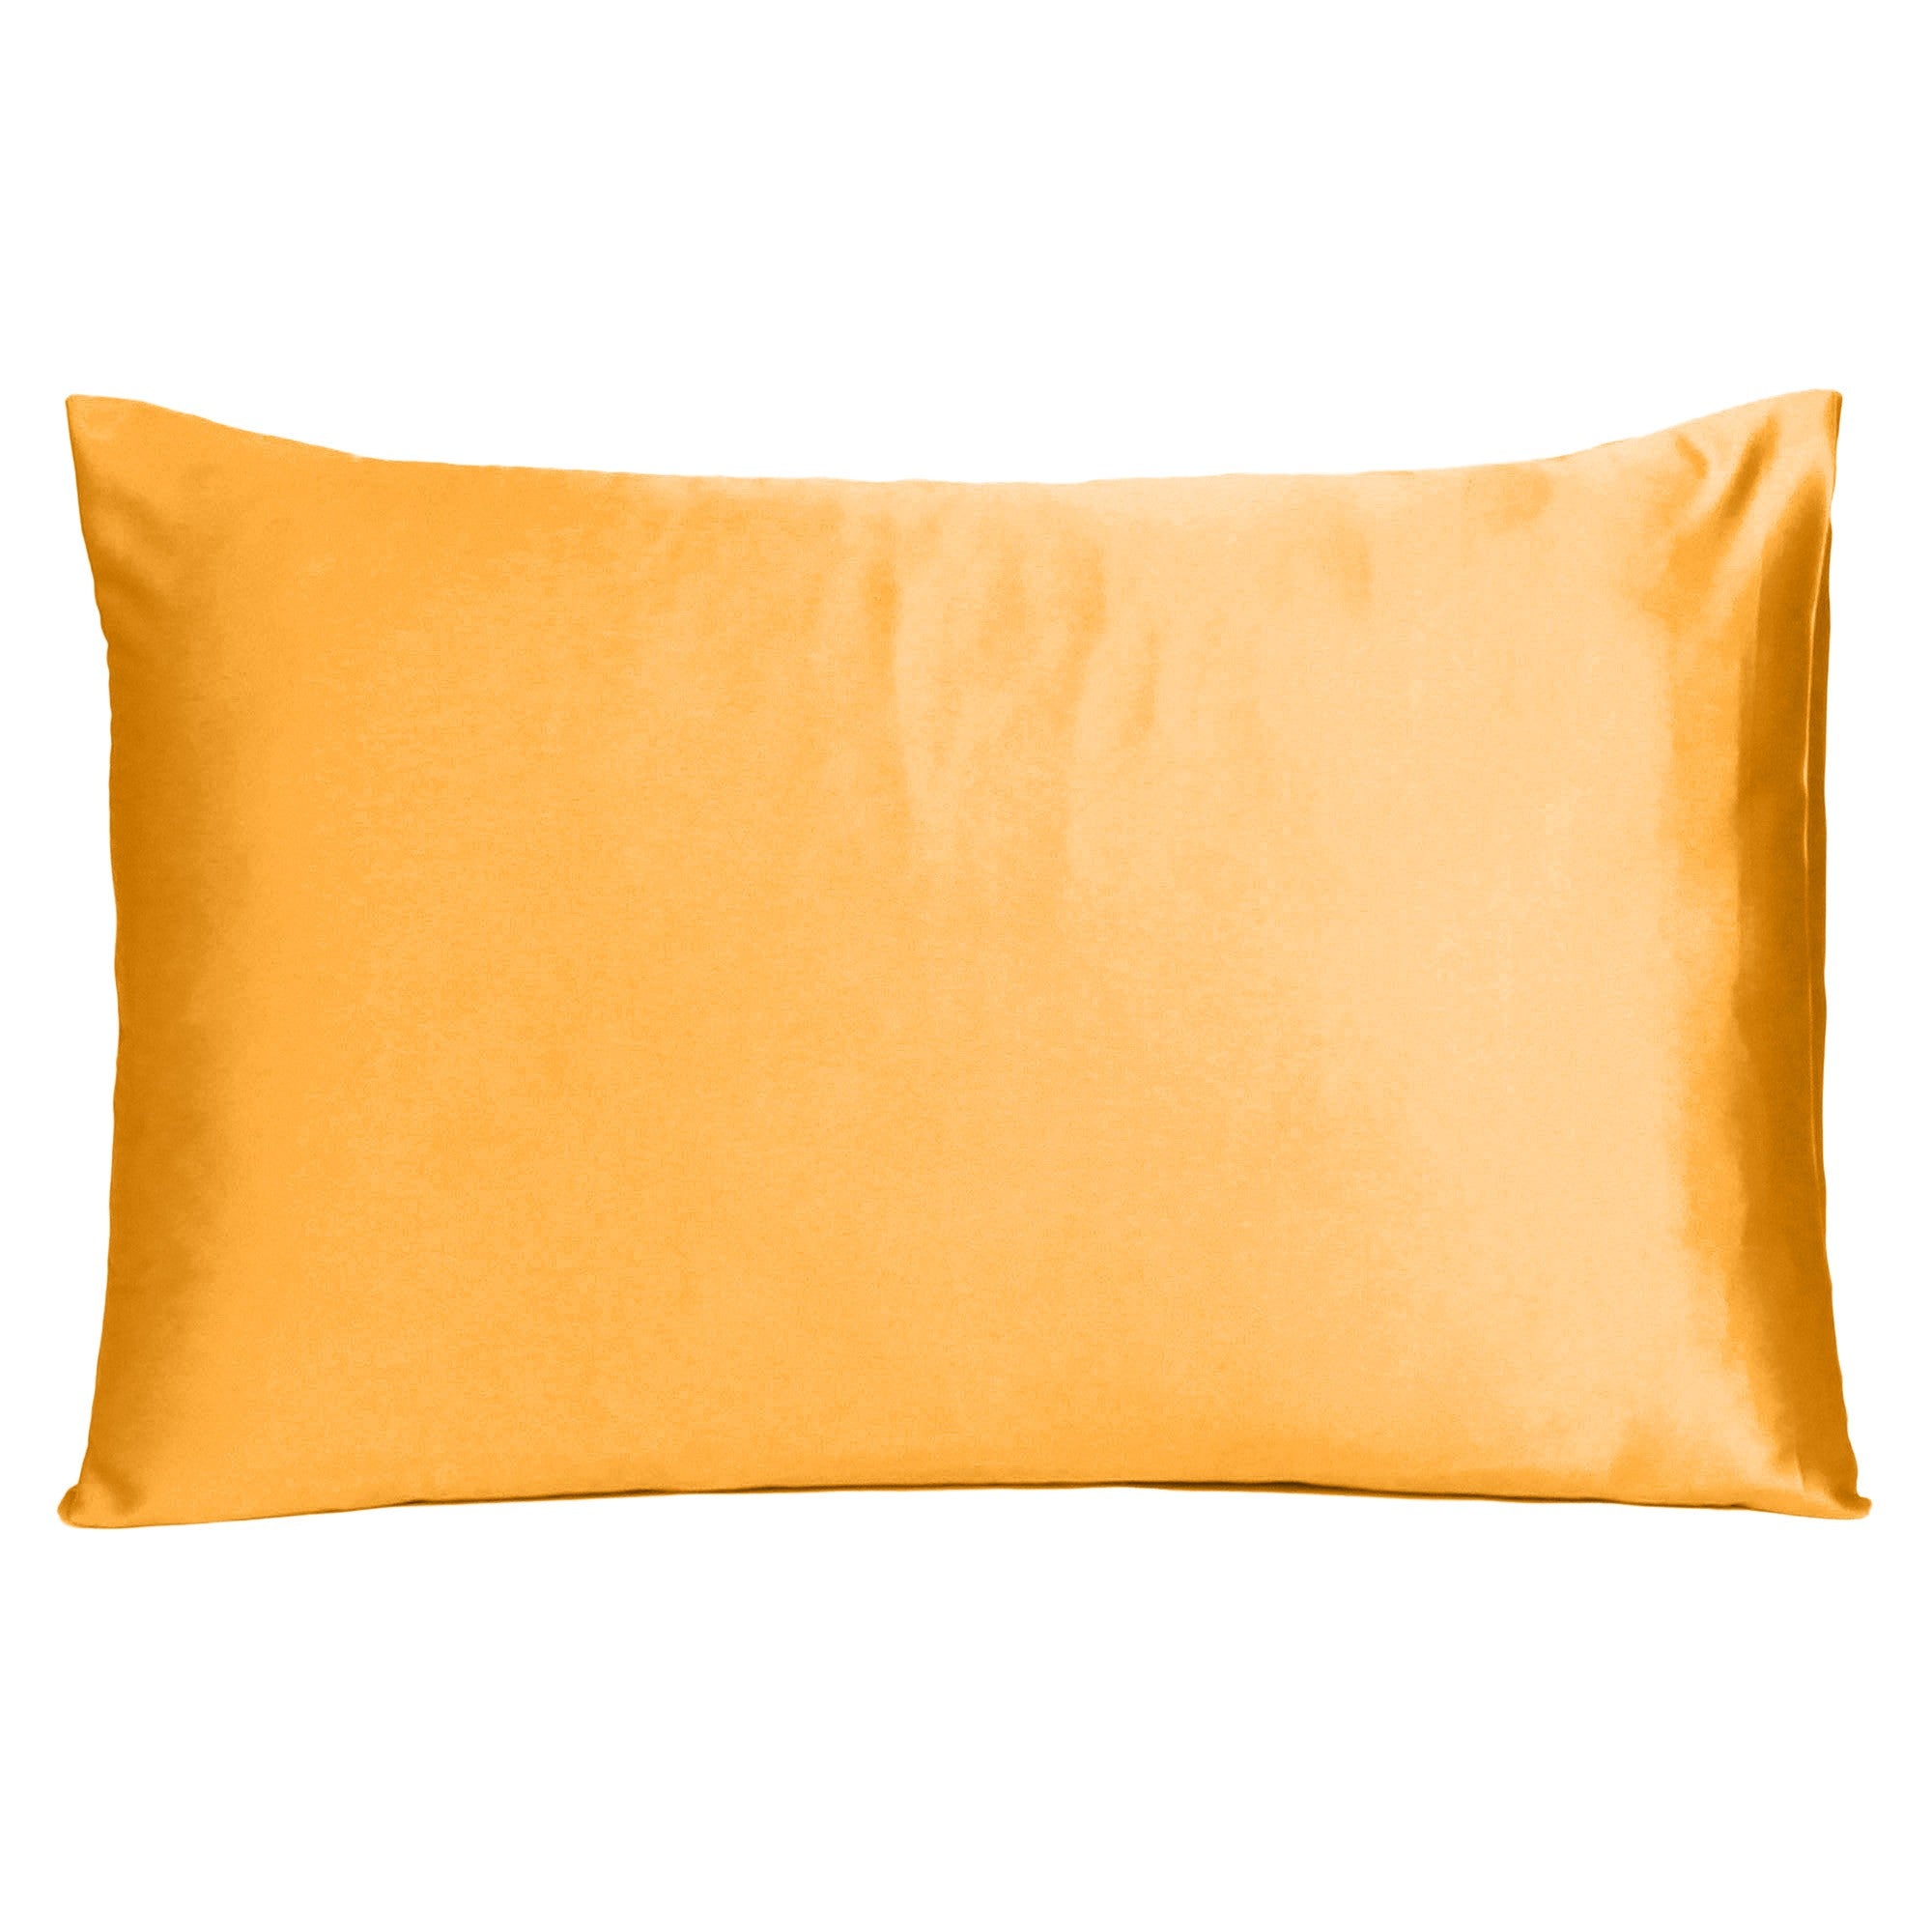 Apricot Dreamy Silky Satin King Size Pillowcase - Tuesday Morning-Bed Sheets